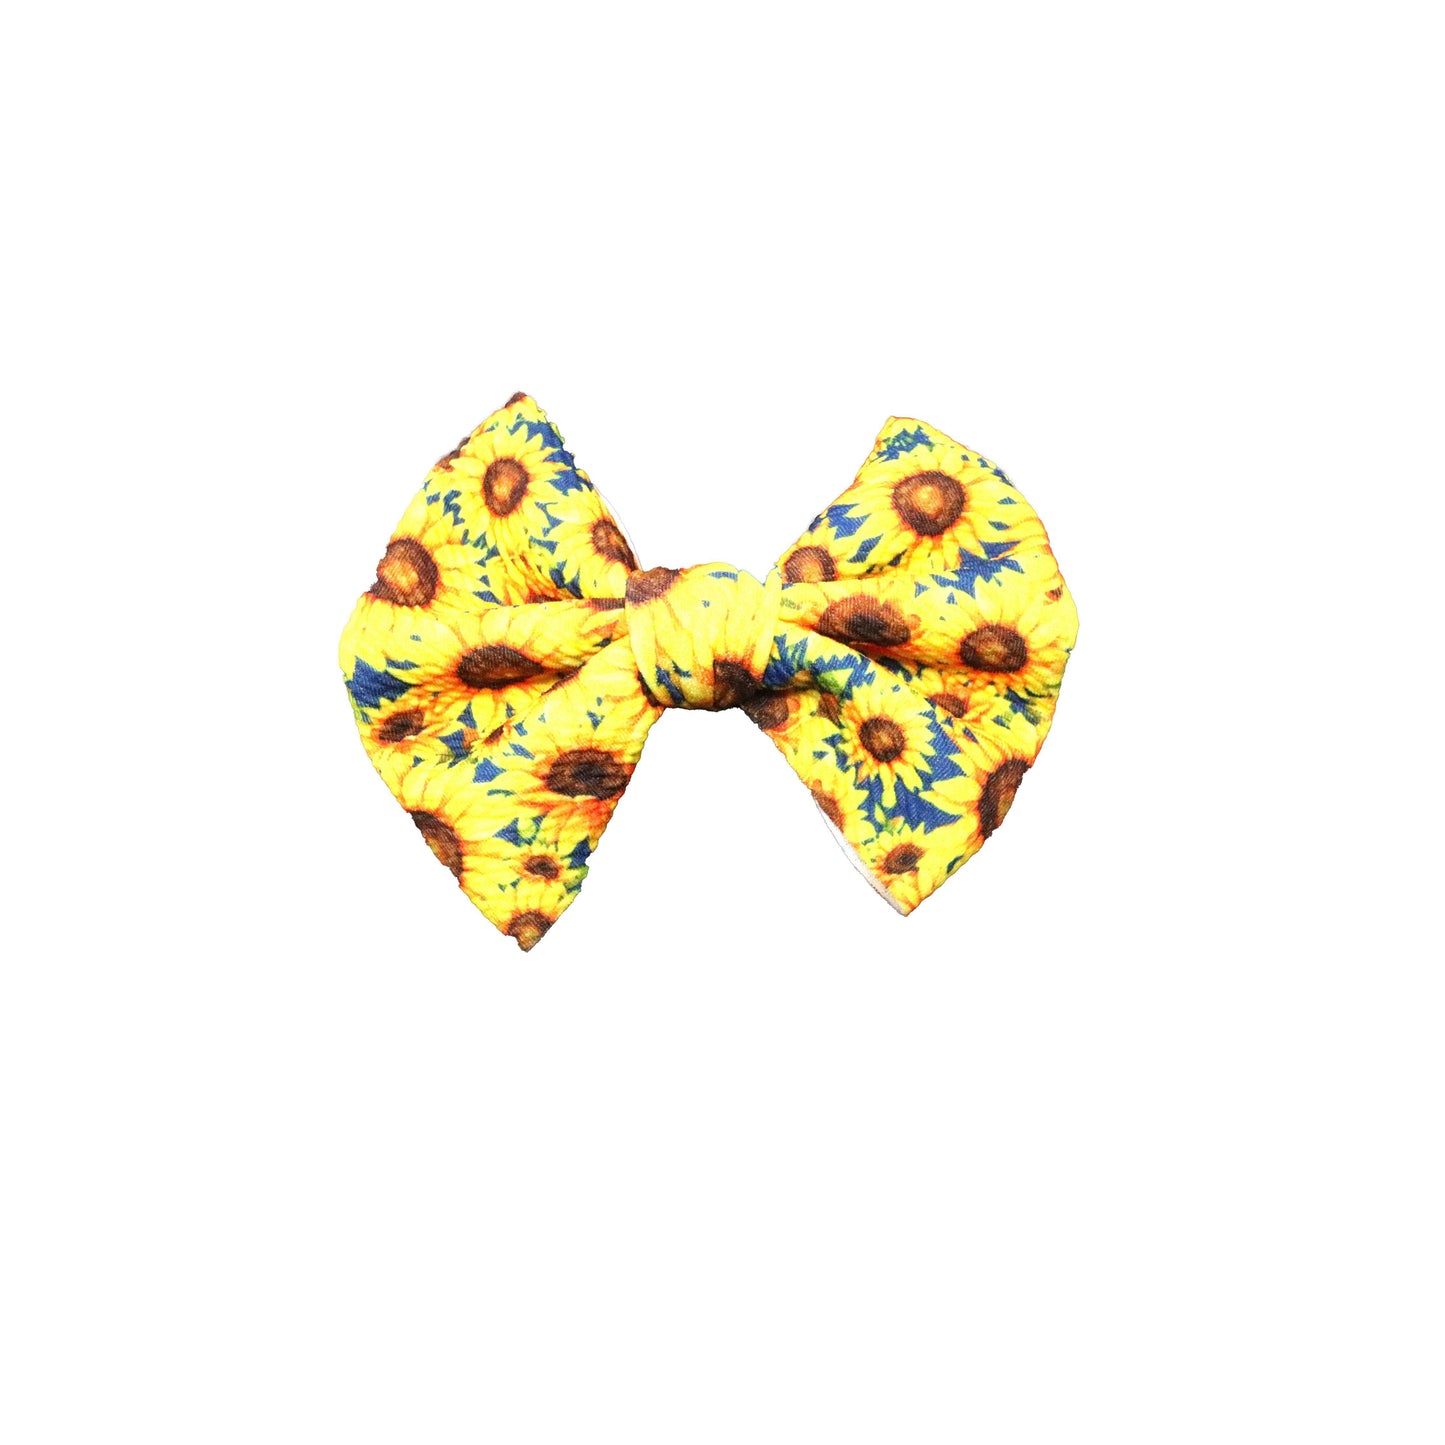 5", Bow, Hair Bow, Sunflower Fields, Fabric Bow, New Product - 04OCT2020